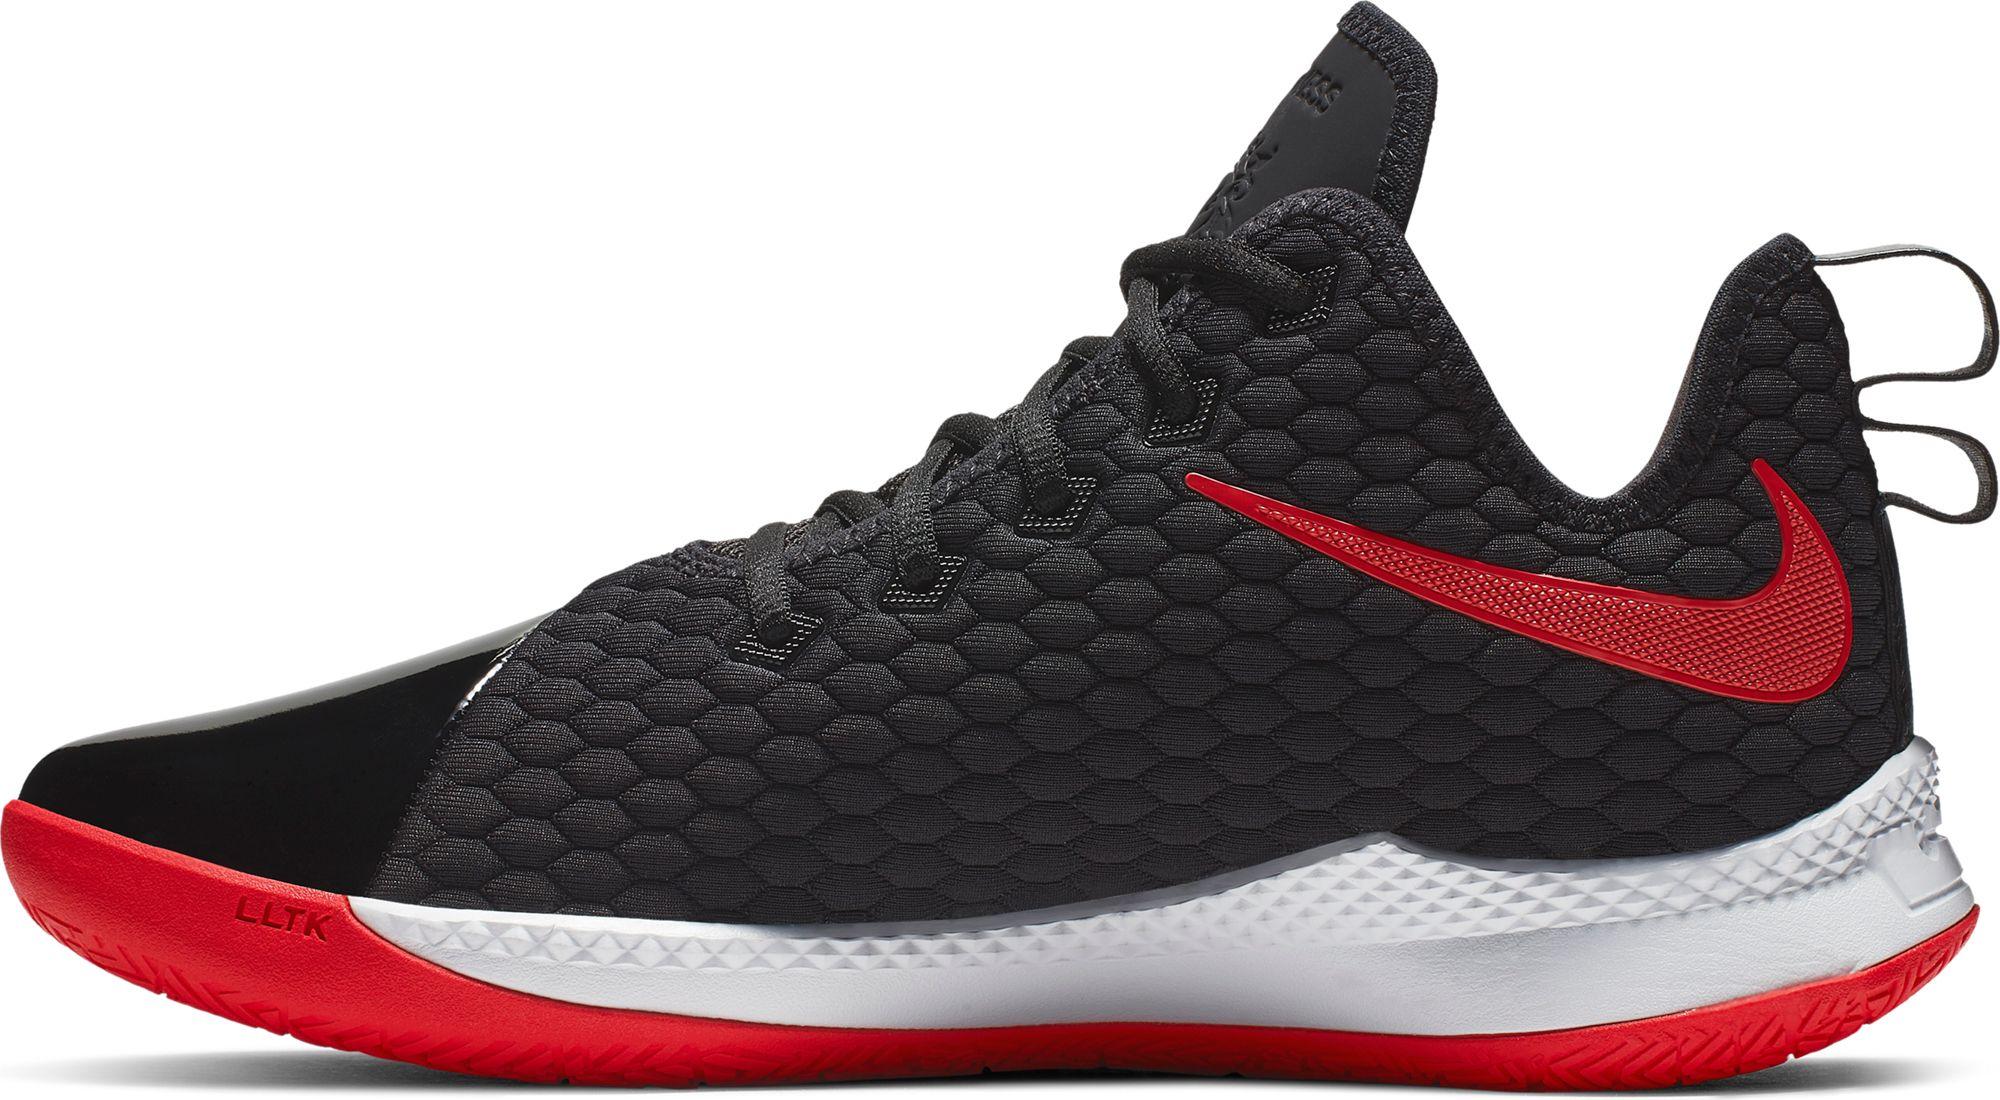 Nike Lebron Witness Iii Basketball Shoes in Black/Red (Black) for Men ...